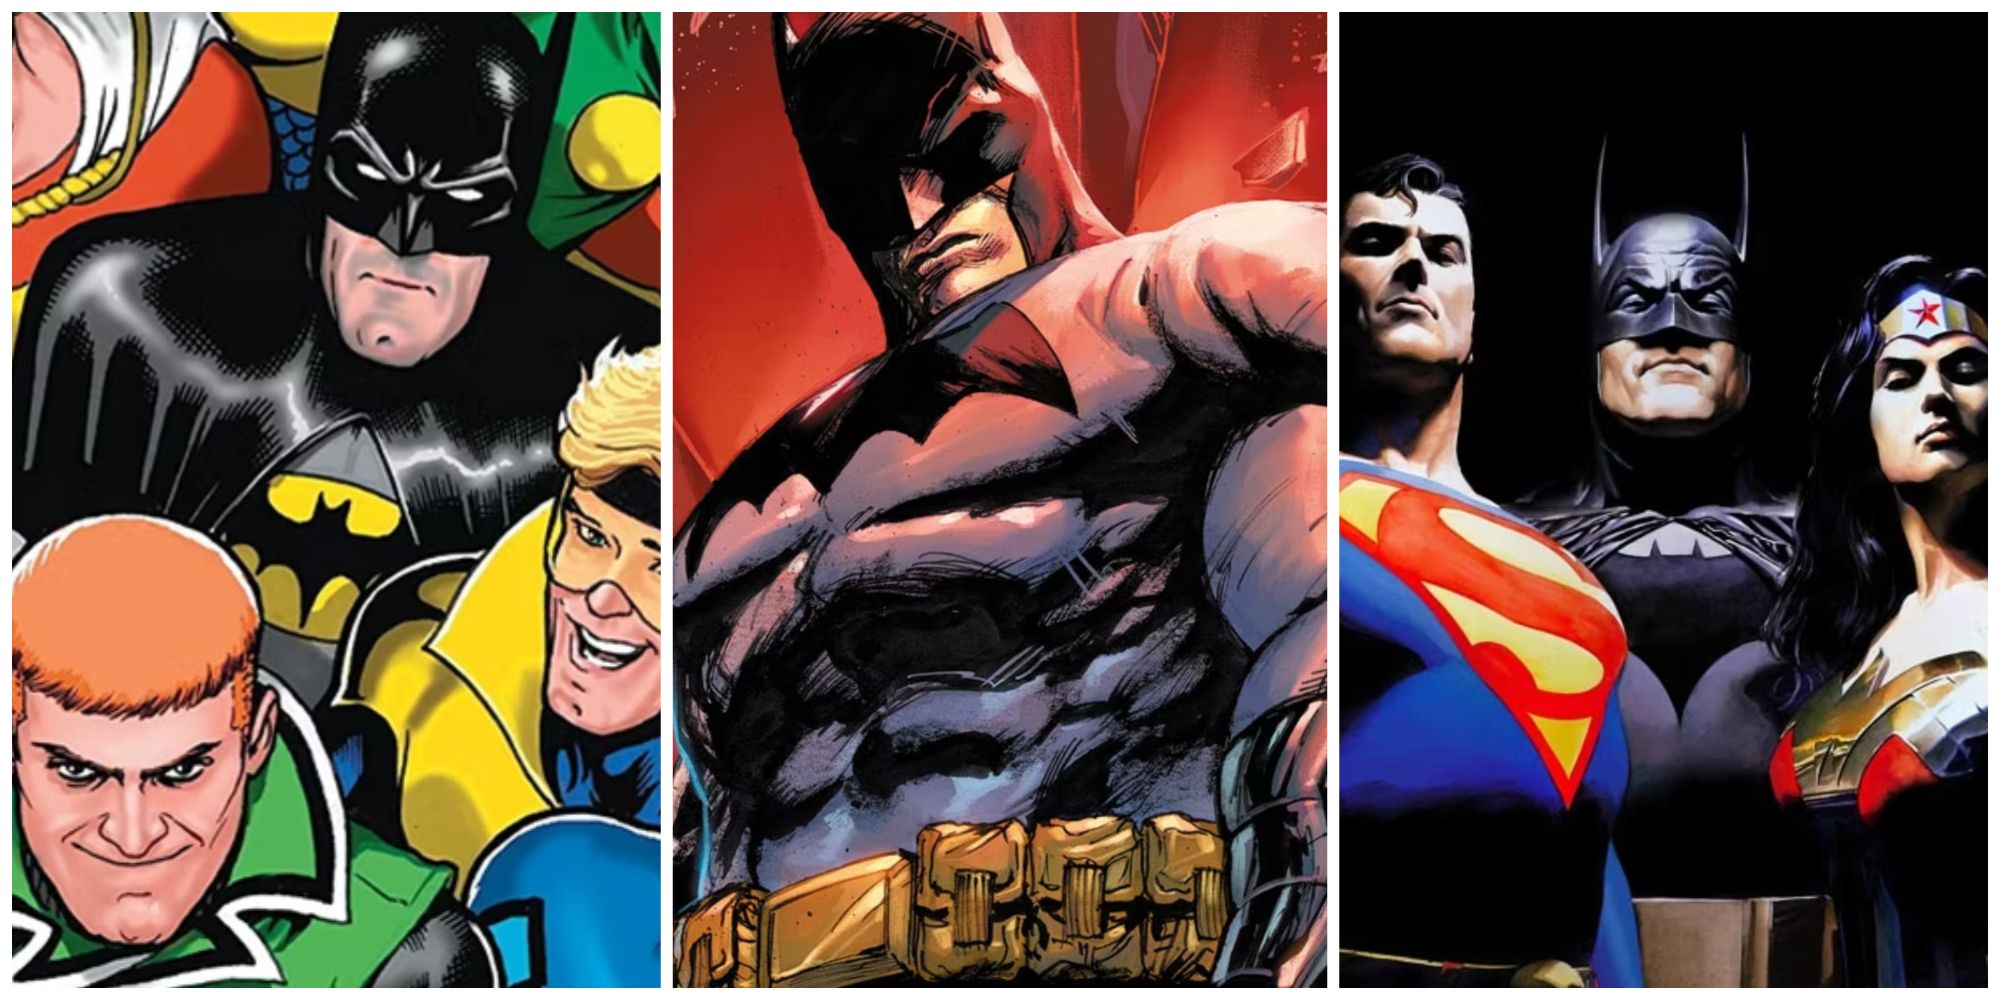 split image of Batman leading the Justice League and International teams with Superman, Wonder Woman, Guy Gardner and Booster Gold